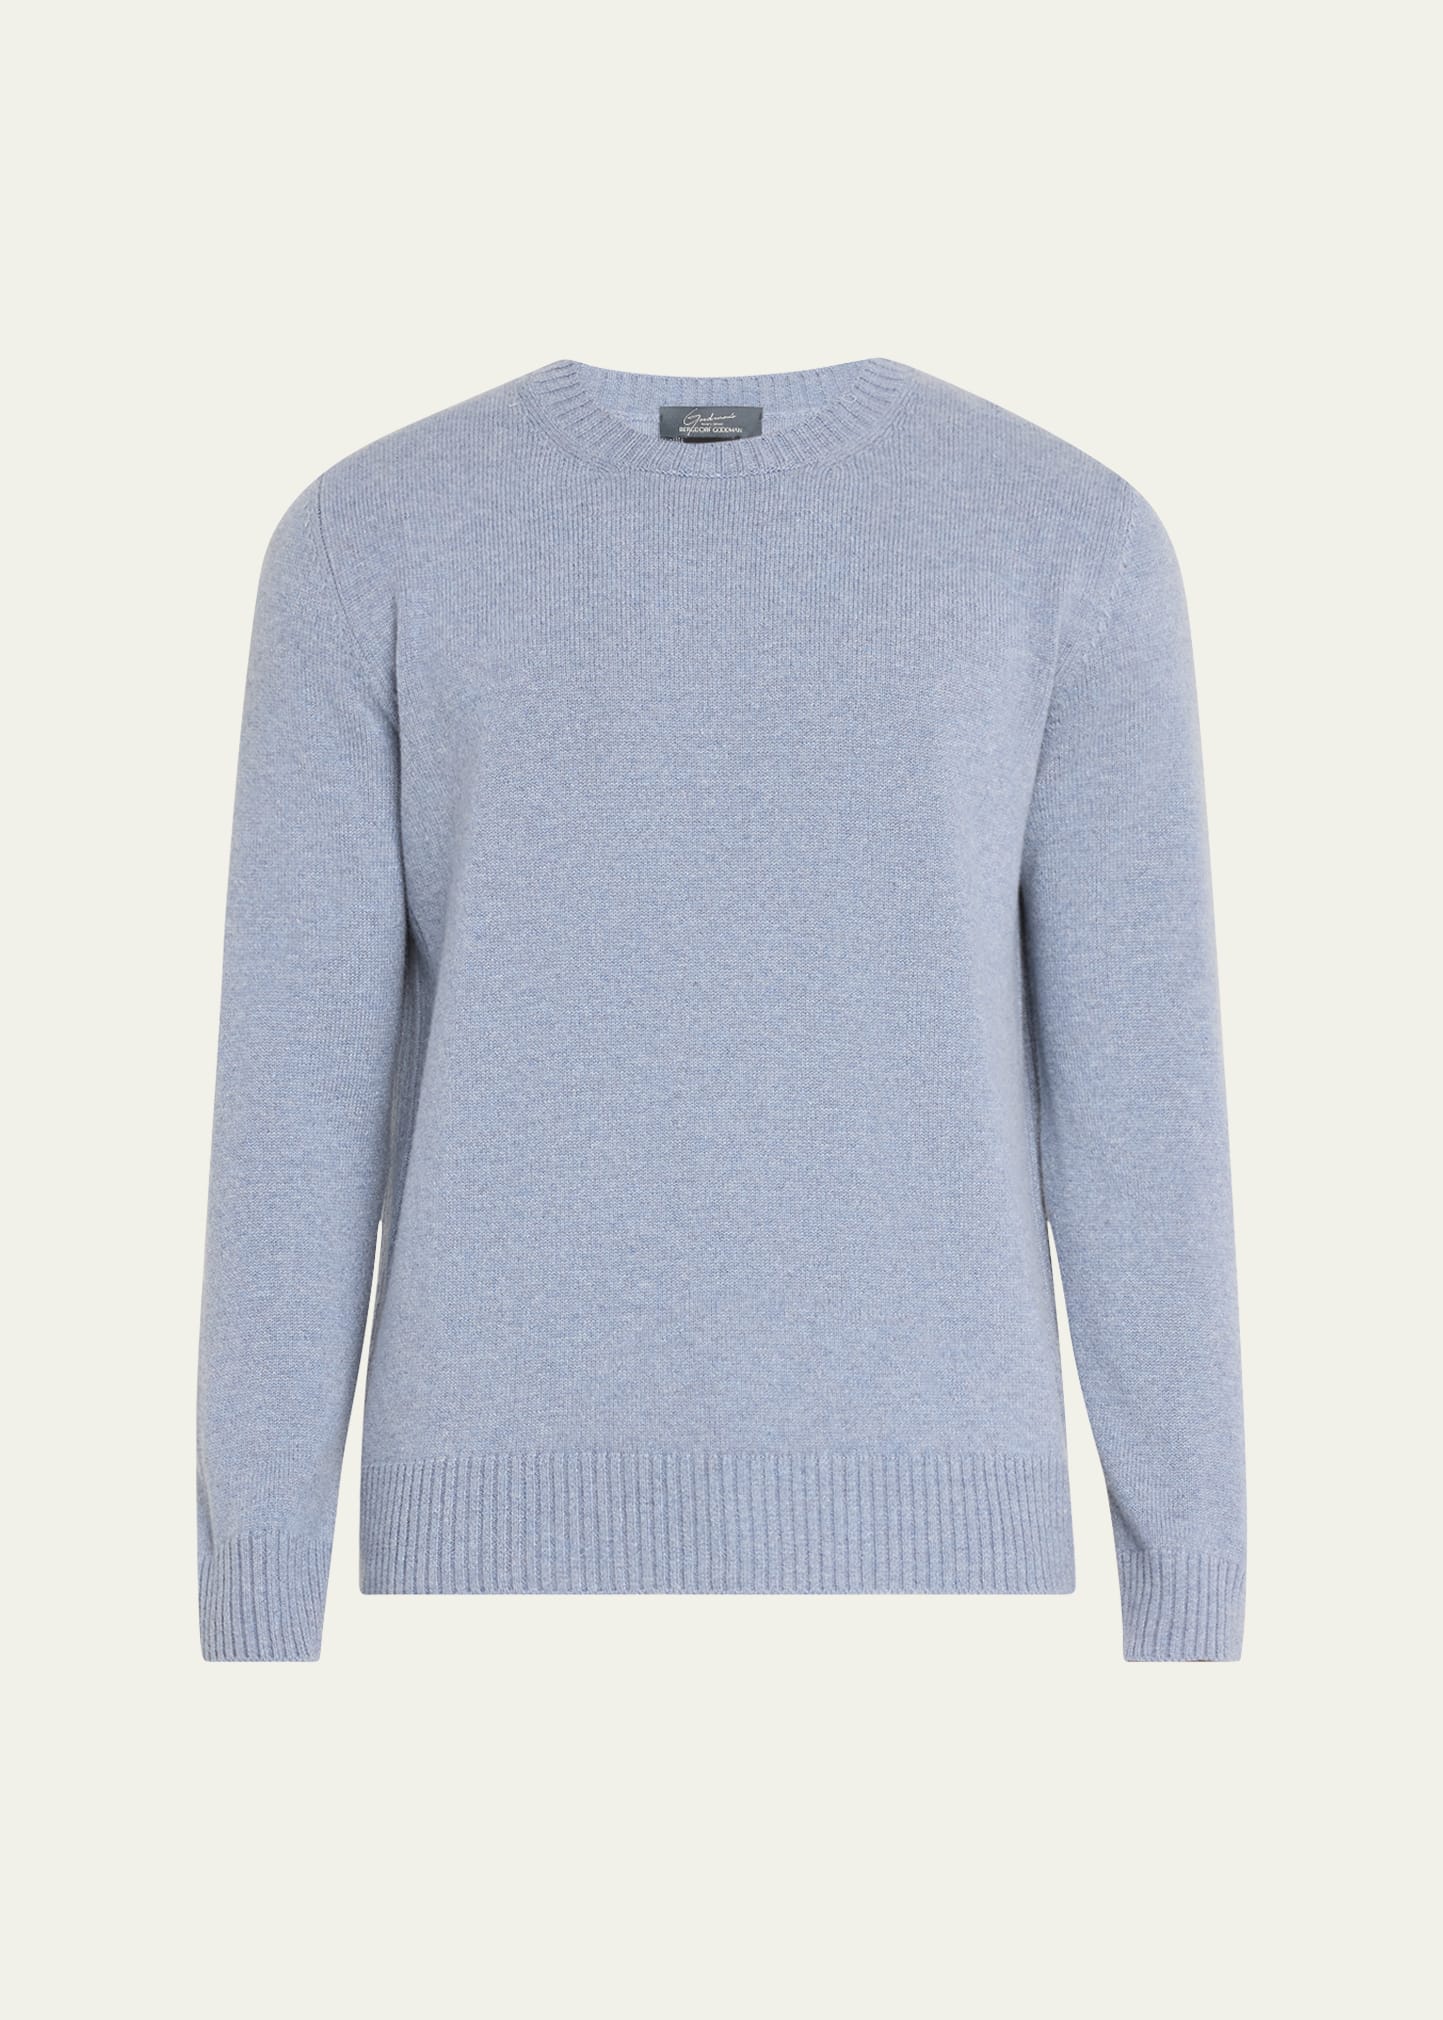 Goodman's Men's Rib Baby Cashmere Pullover In Blue